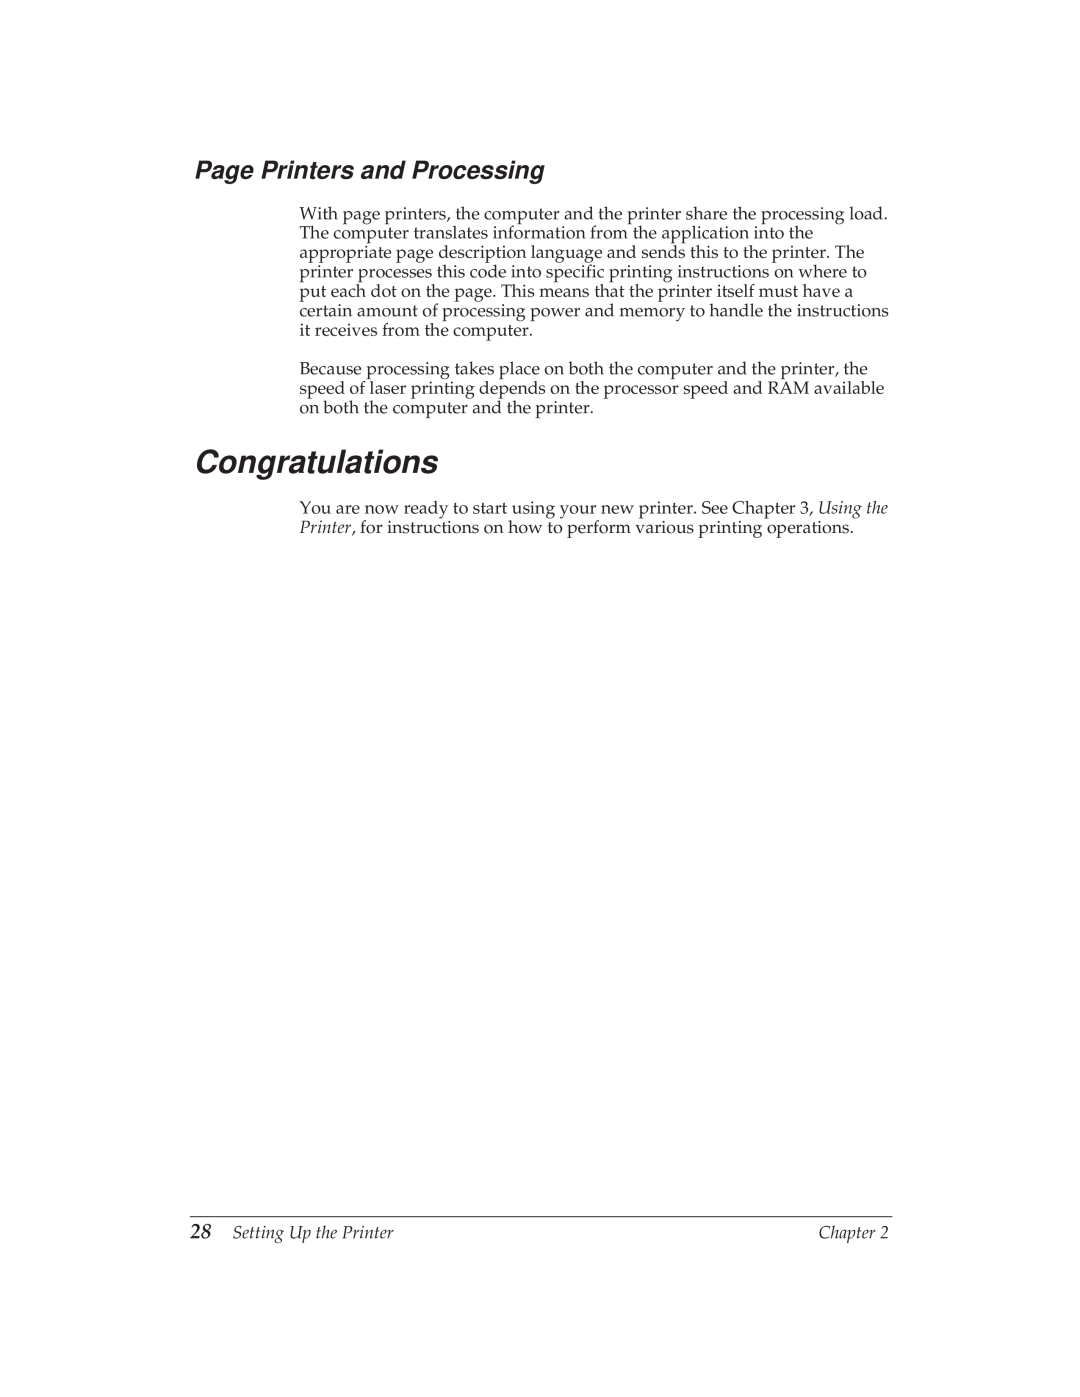 Canon BJ-30 manual Congratulations, Page Printers and Processing 